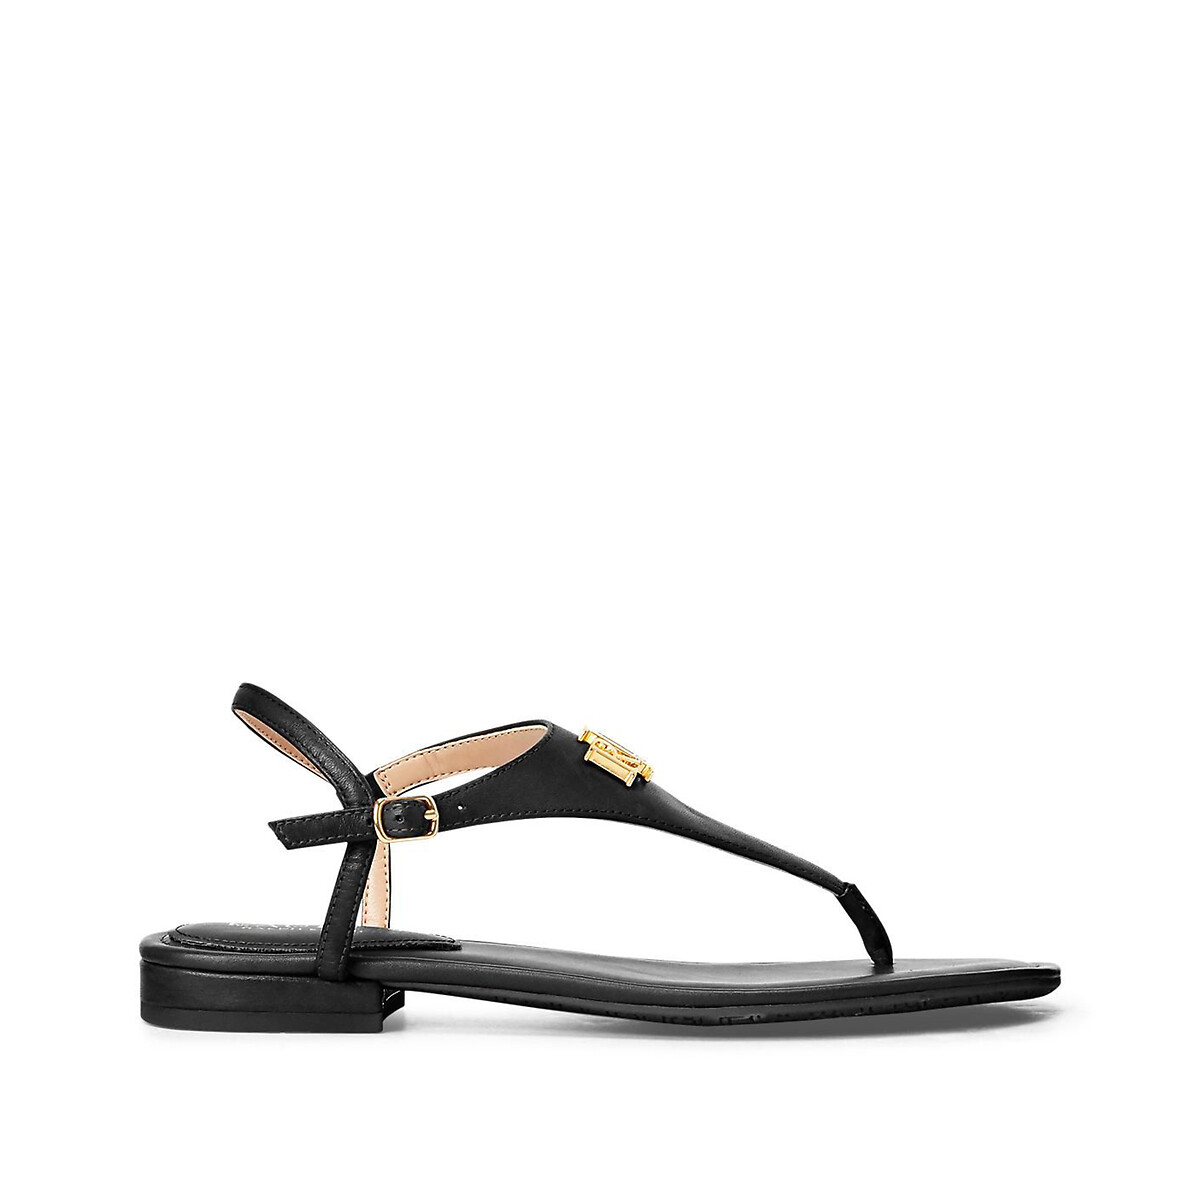 Leather Toe Post Sandals with Flat Heel